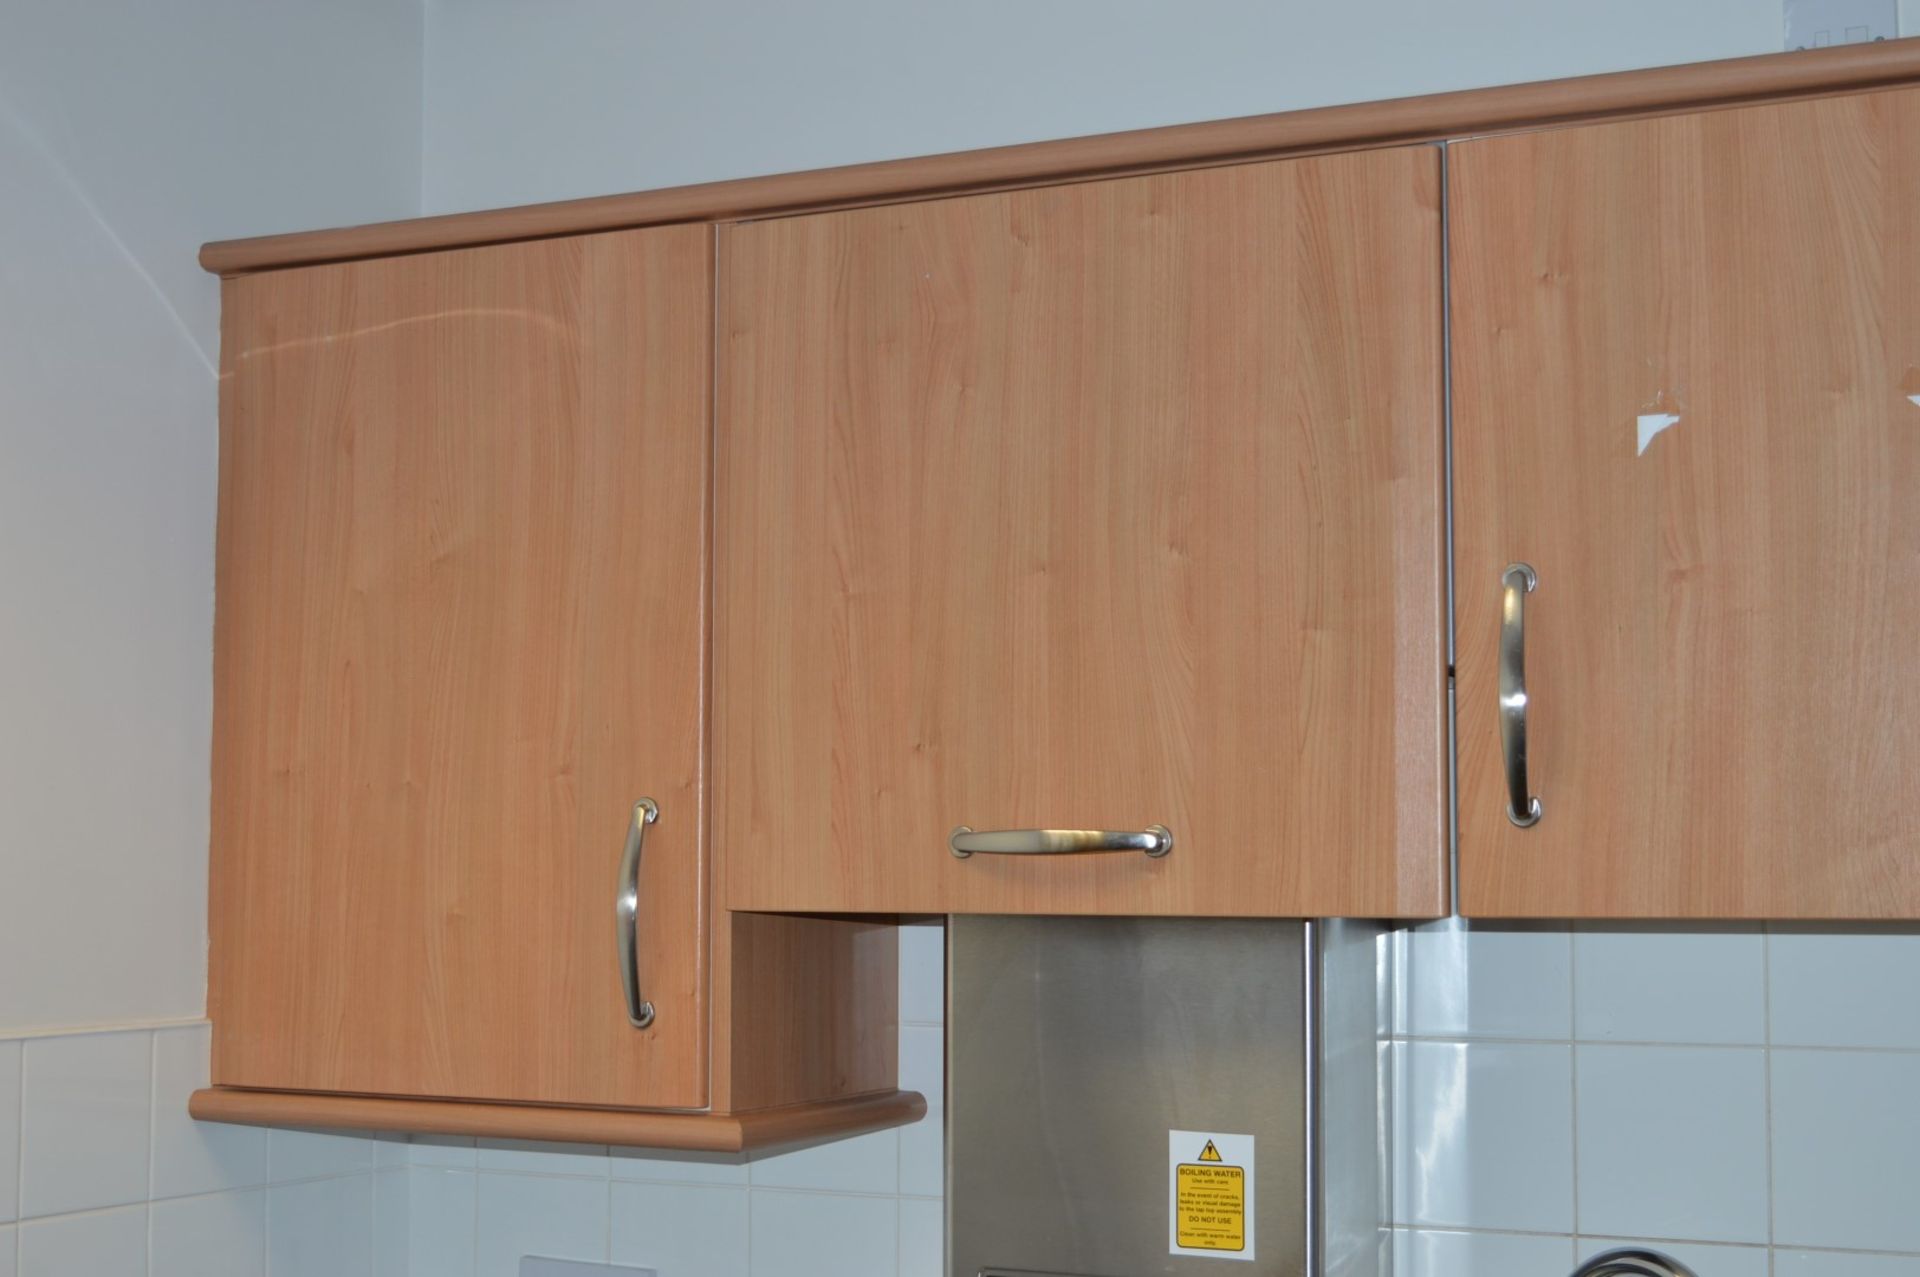 1 x Contemporary Kitchen - Includes Selection of Carcasses With Beech Doors, Chrome Handles, Black - Image 3 of 10